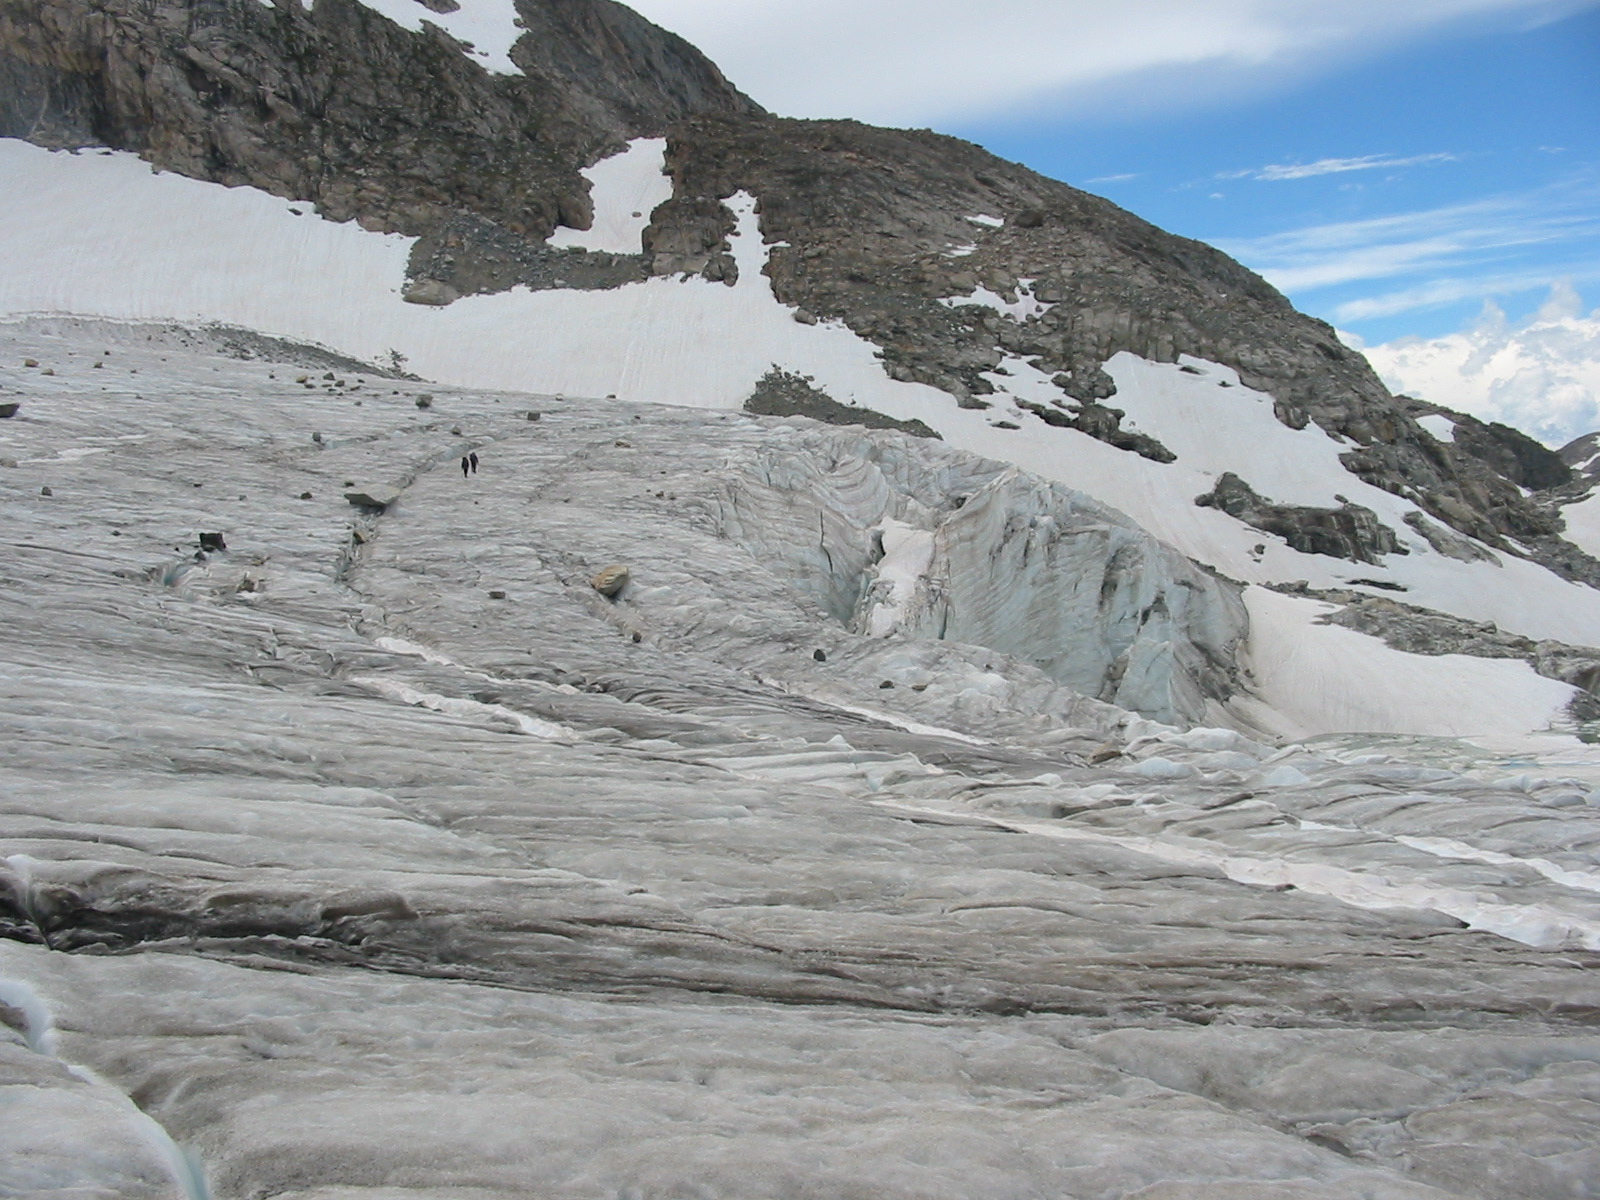 Peter and Olid wandering on Sourdough glacier's ice cliffs